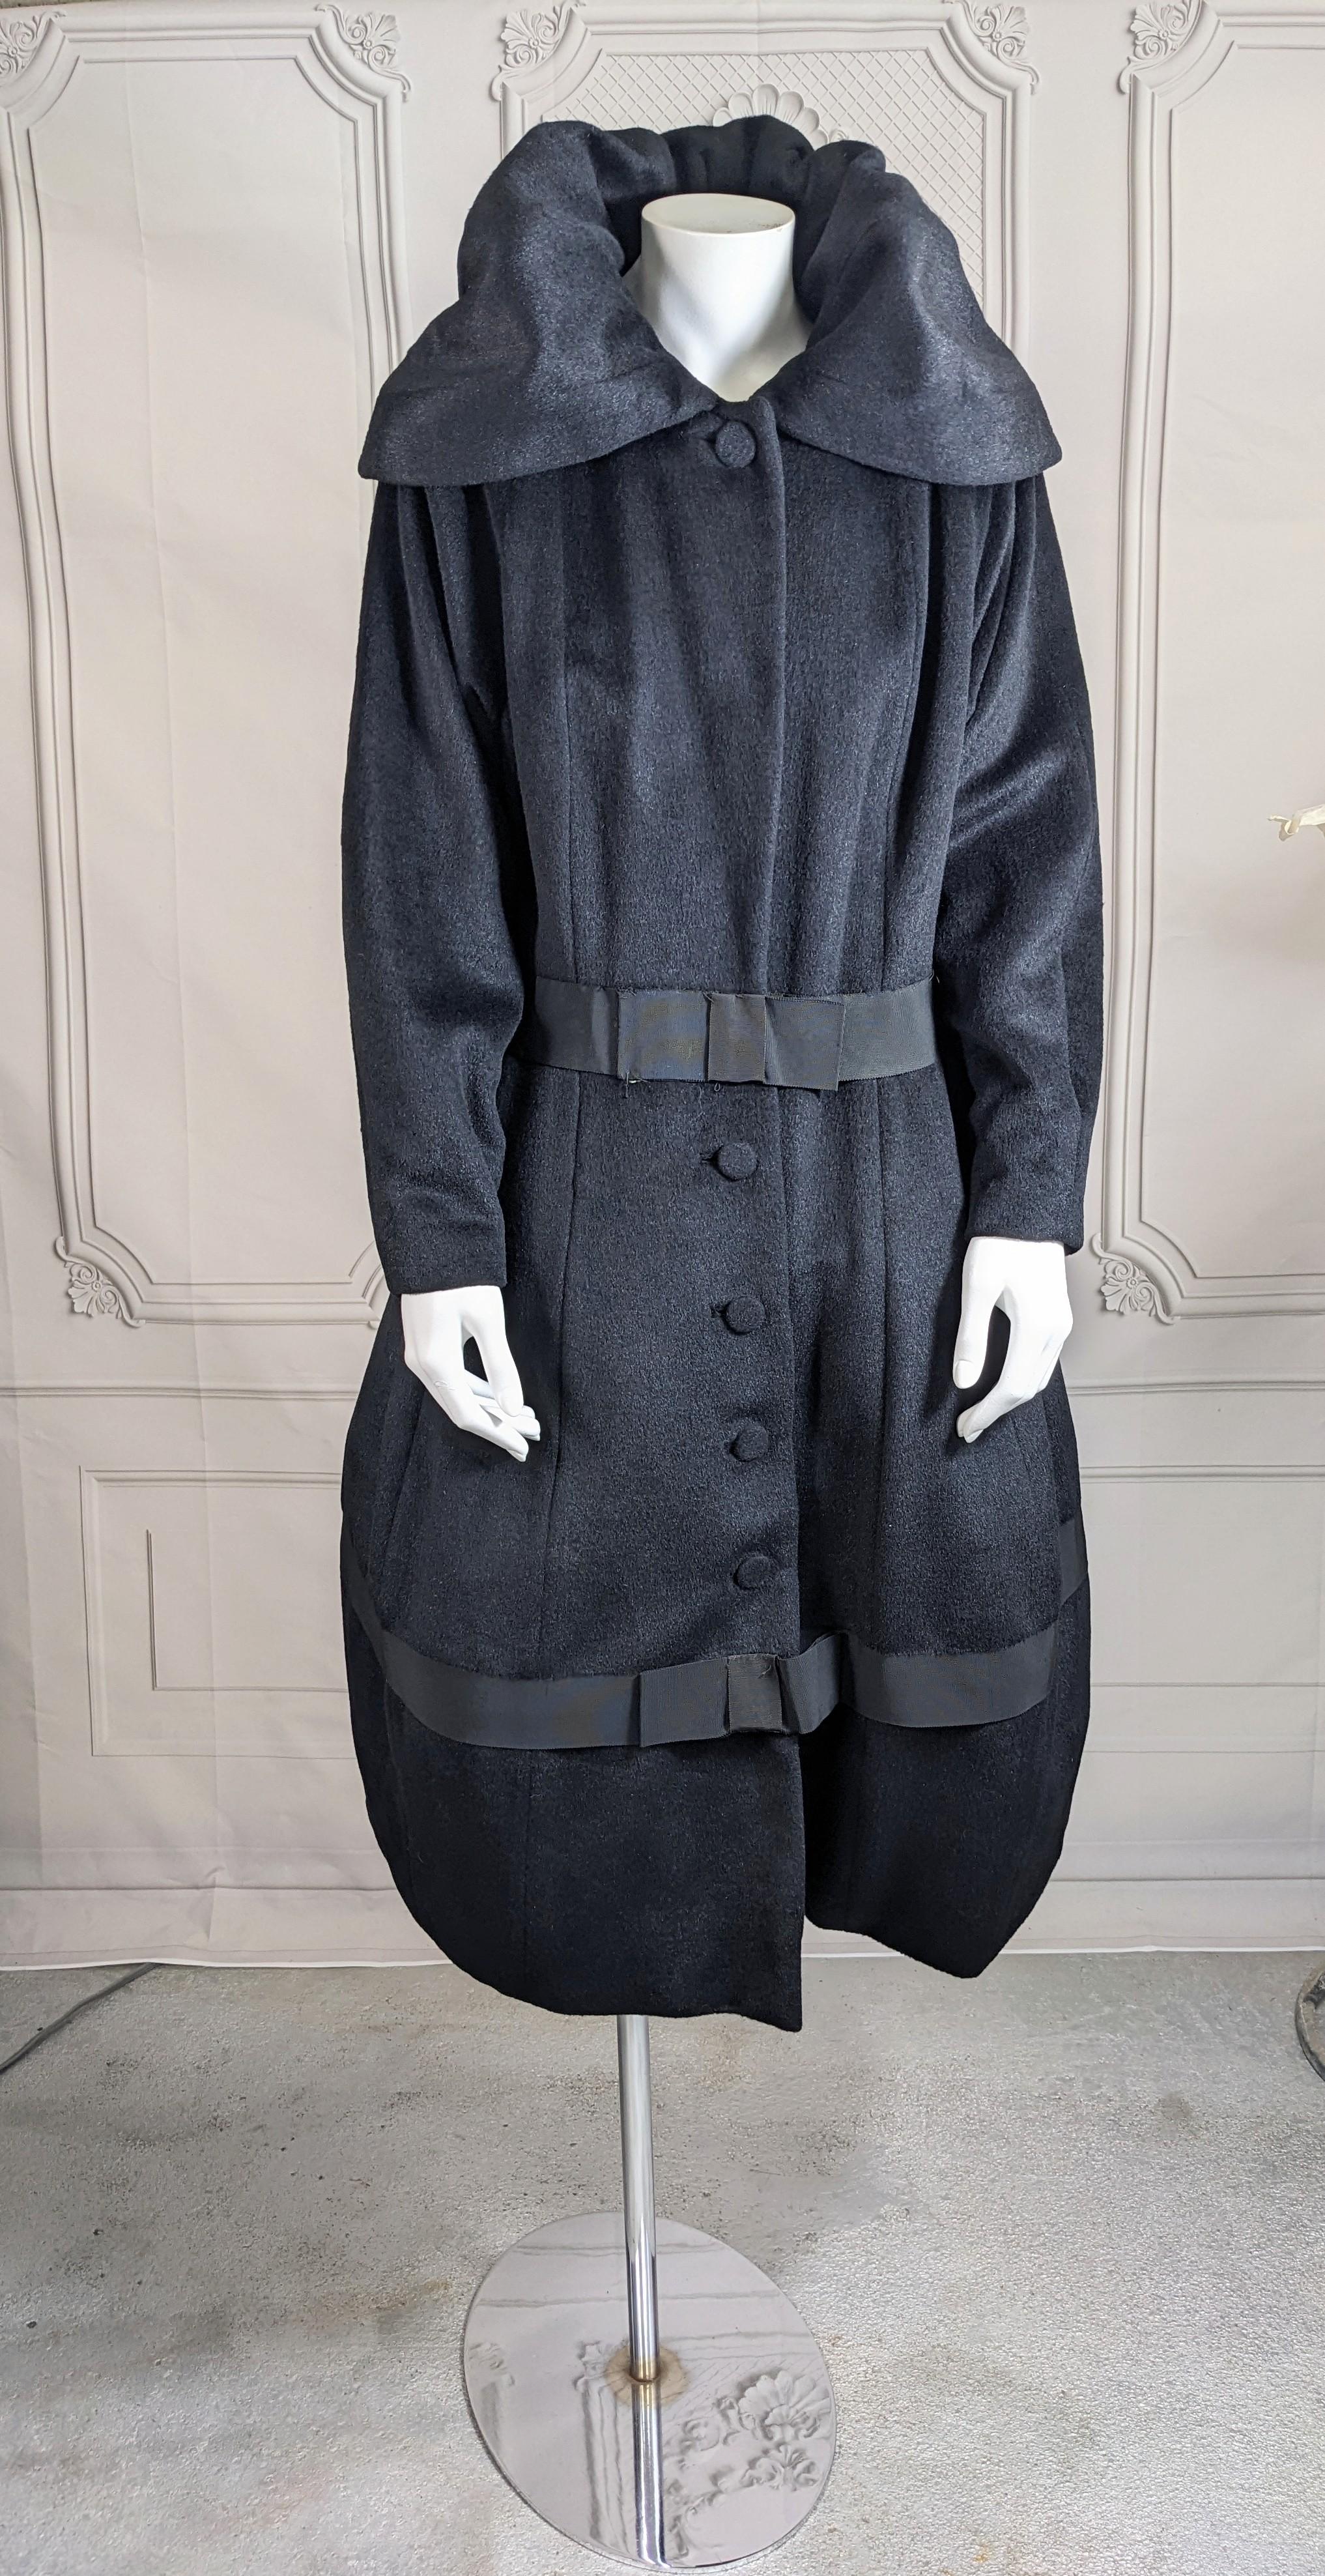 Lilli Ann Edwardian Inspired Lantern Coat In Good Condition For Sale In New York, NY